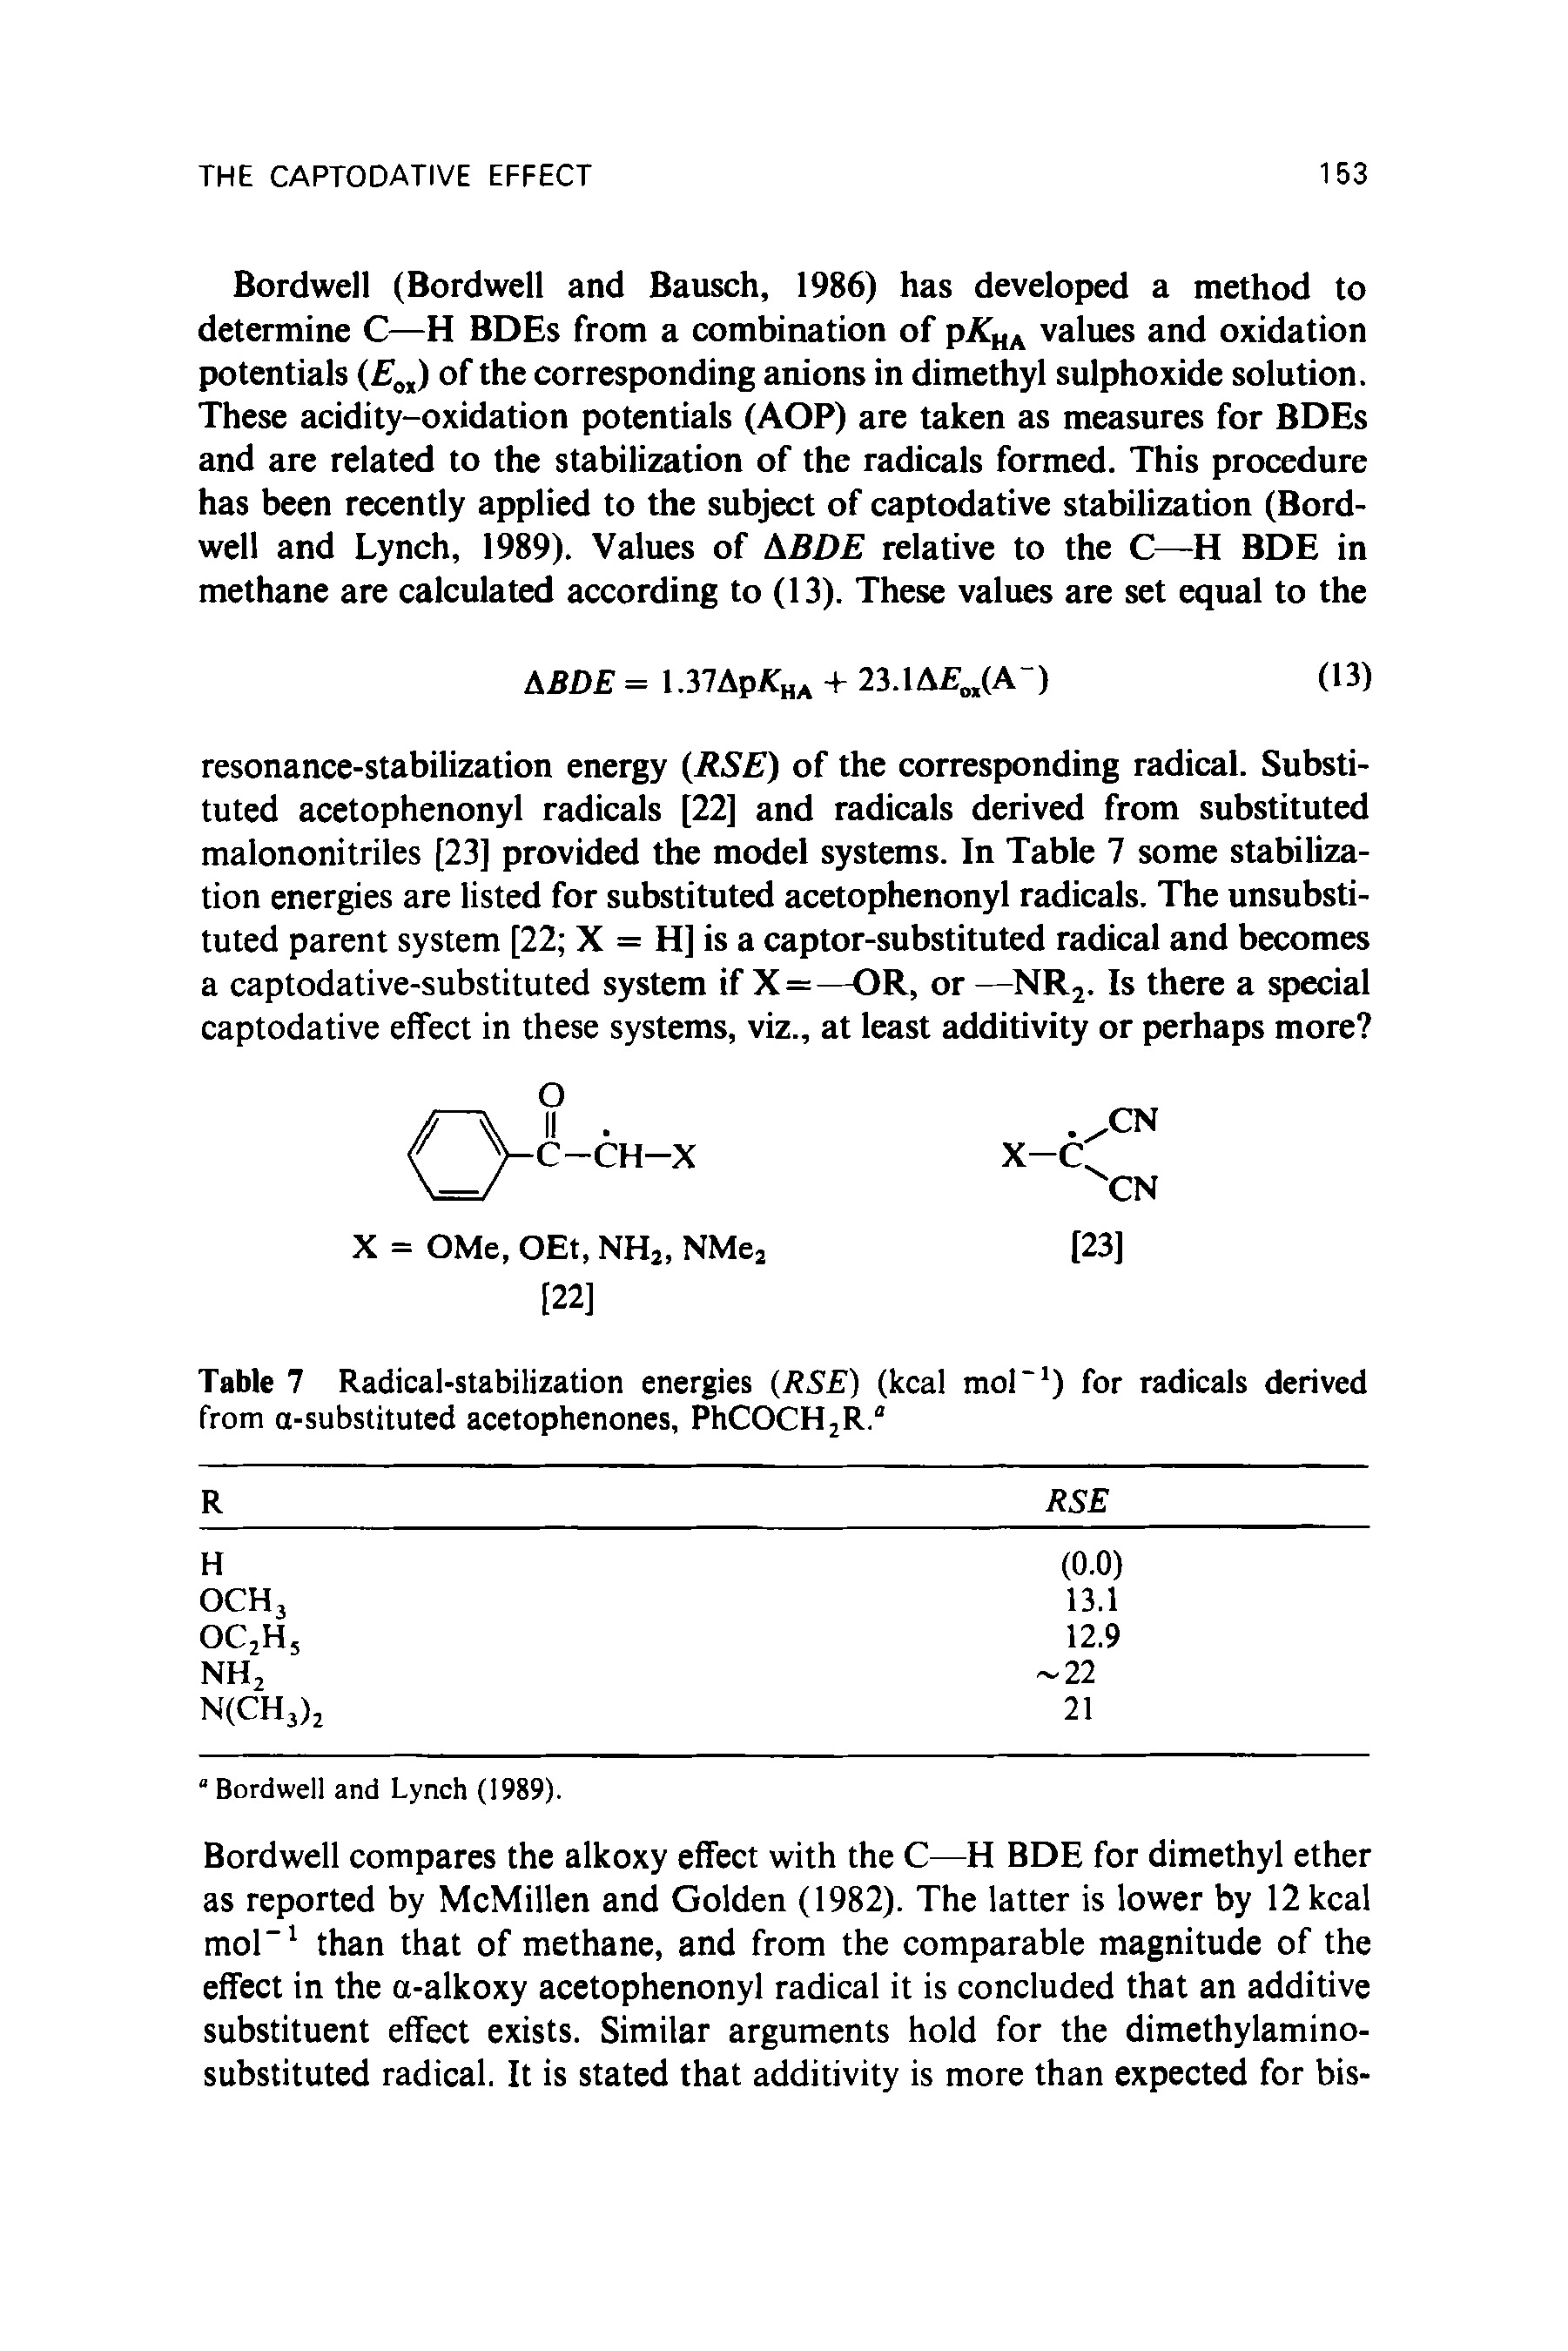 Table 7 Radical-stabilization energies (RSE) (kcal mol ) for radicals derived from a-substituted acetophenones, PhCOCHjR."...